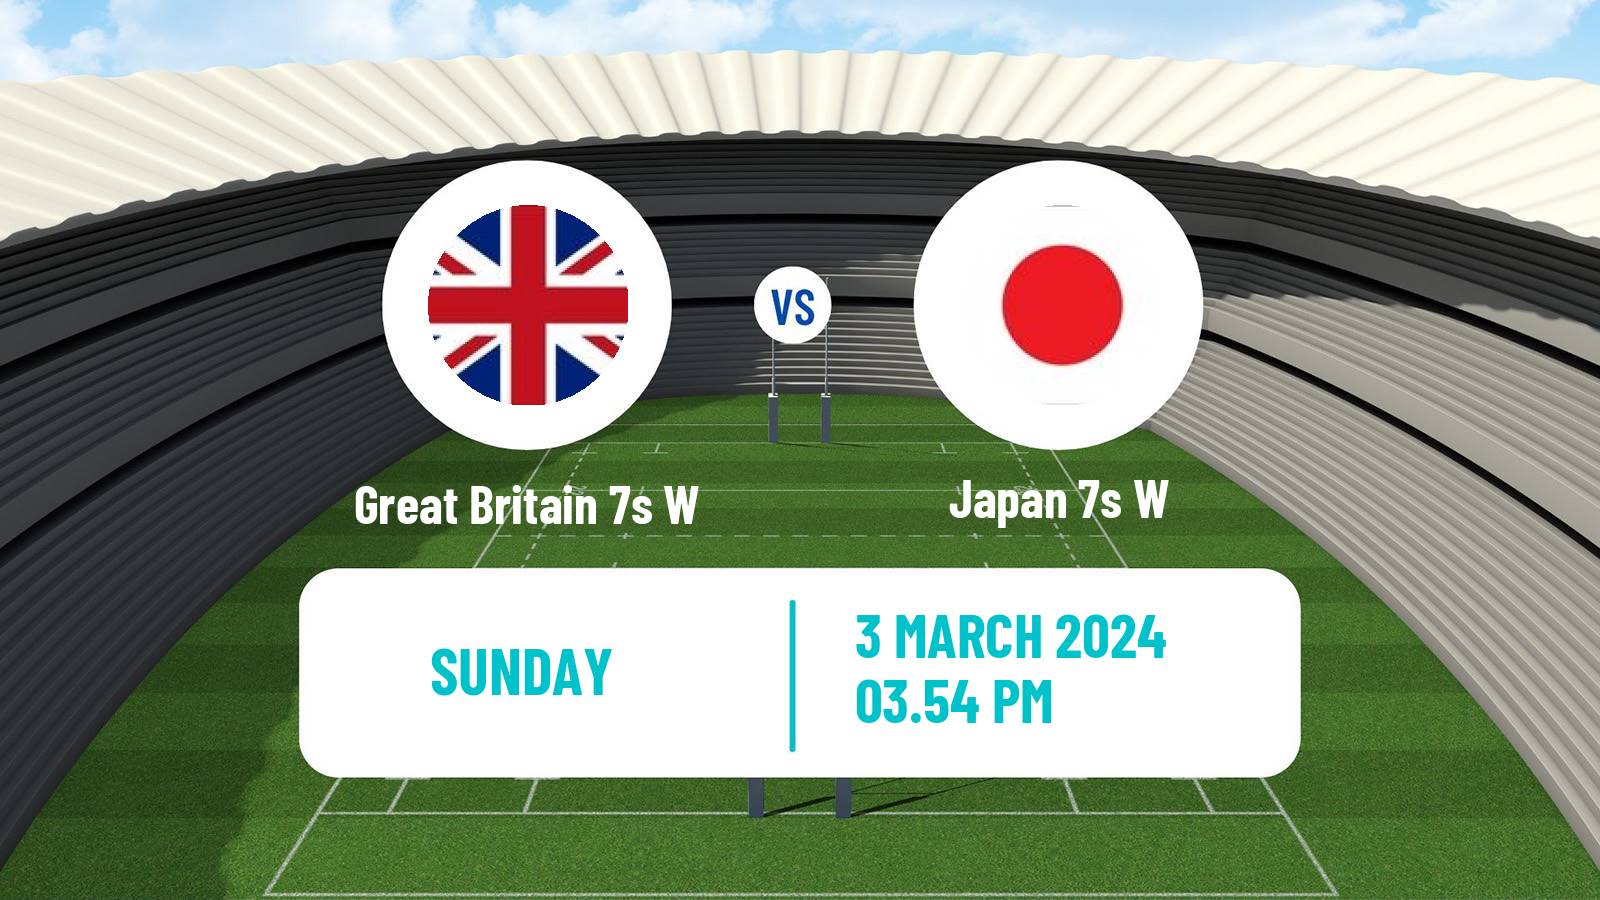 Rugby union Sevens World Series Women - USA Great Britain 7s W - Japan 7s W